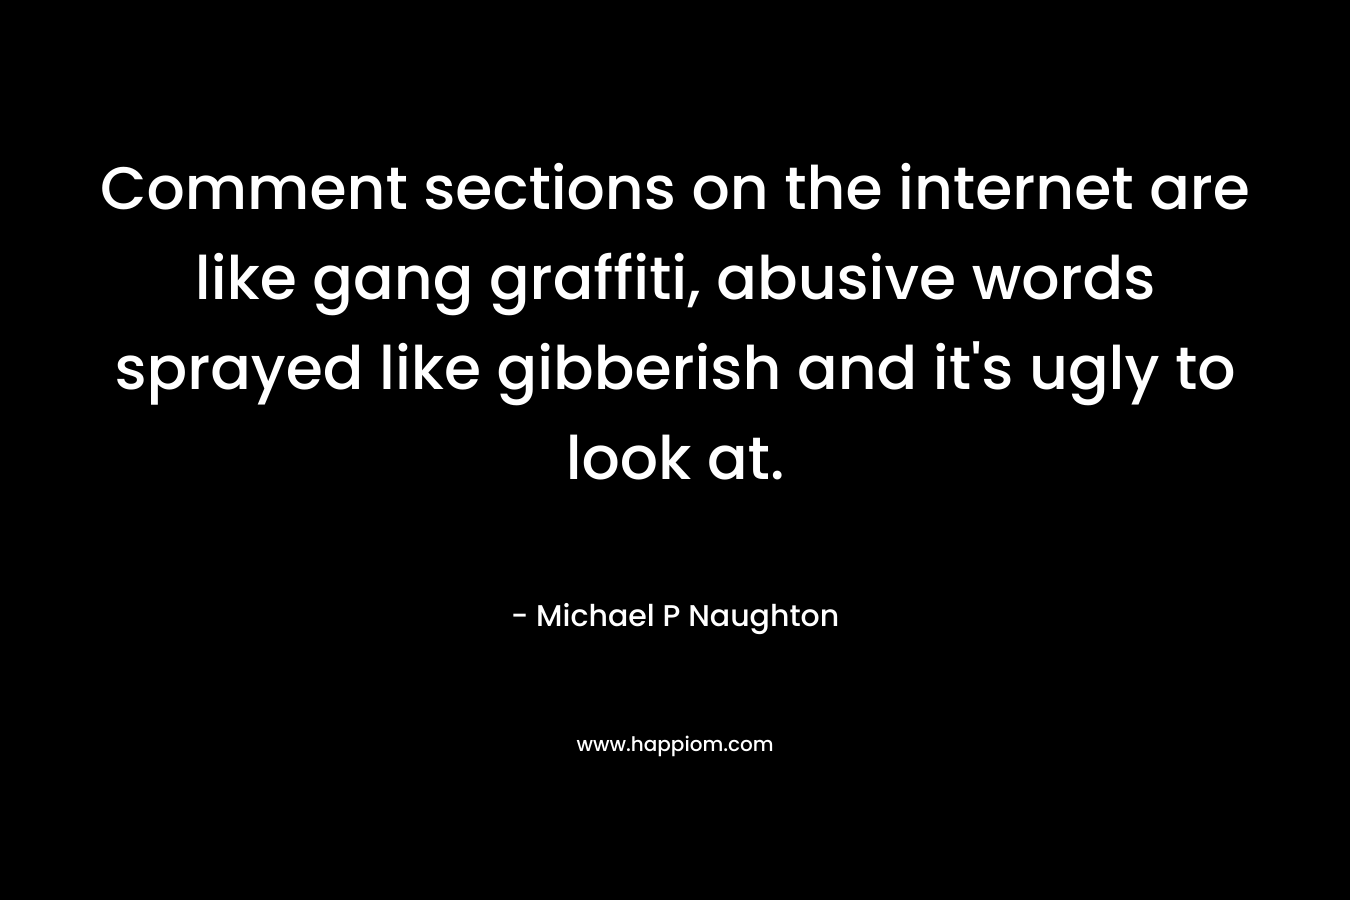 Comment sections on the internet are like gang graffiti, abusive words sprayed like gibberish and it's ugly to look at.